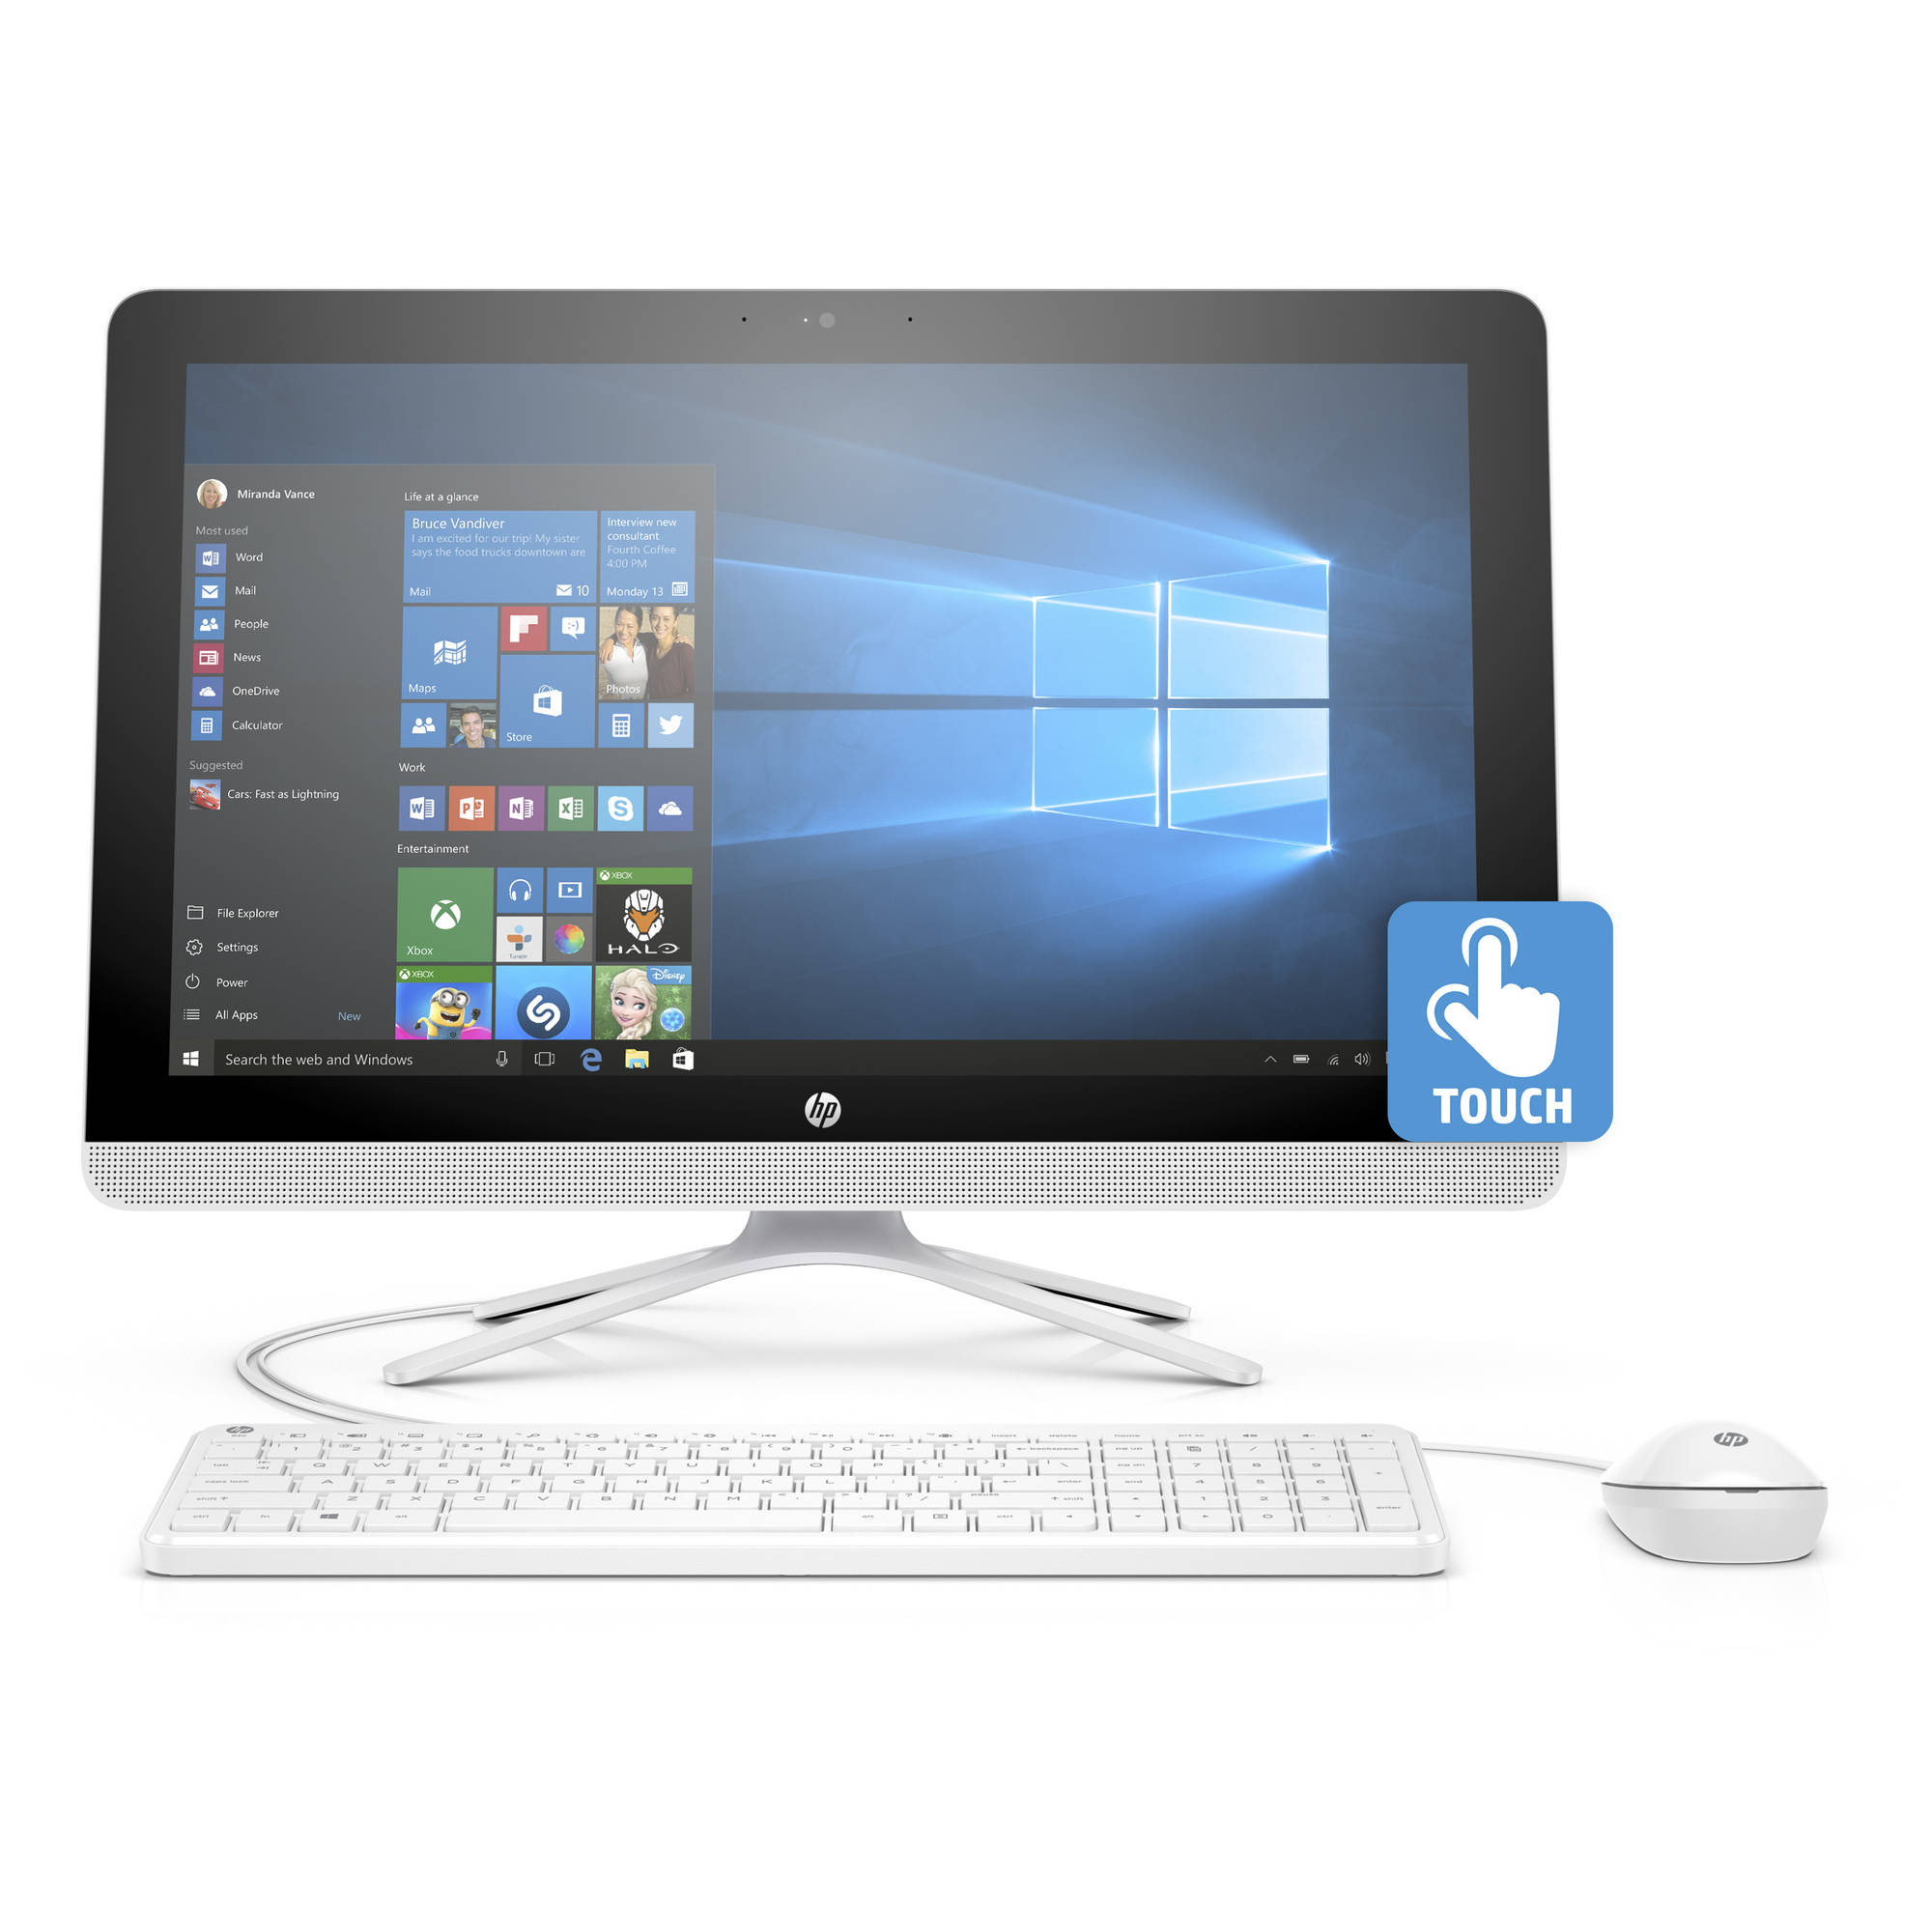 HP 22-b013w Snow White All-in-One PC with 21.5" Full HD IPS Touch Display, Intel Pentium J3710 Processor, 4GB Memory, 1TB Hard Drive and Windows 10 Home - image 1 of 3